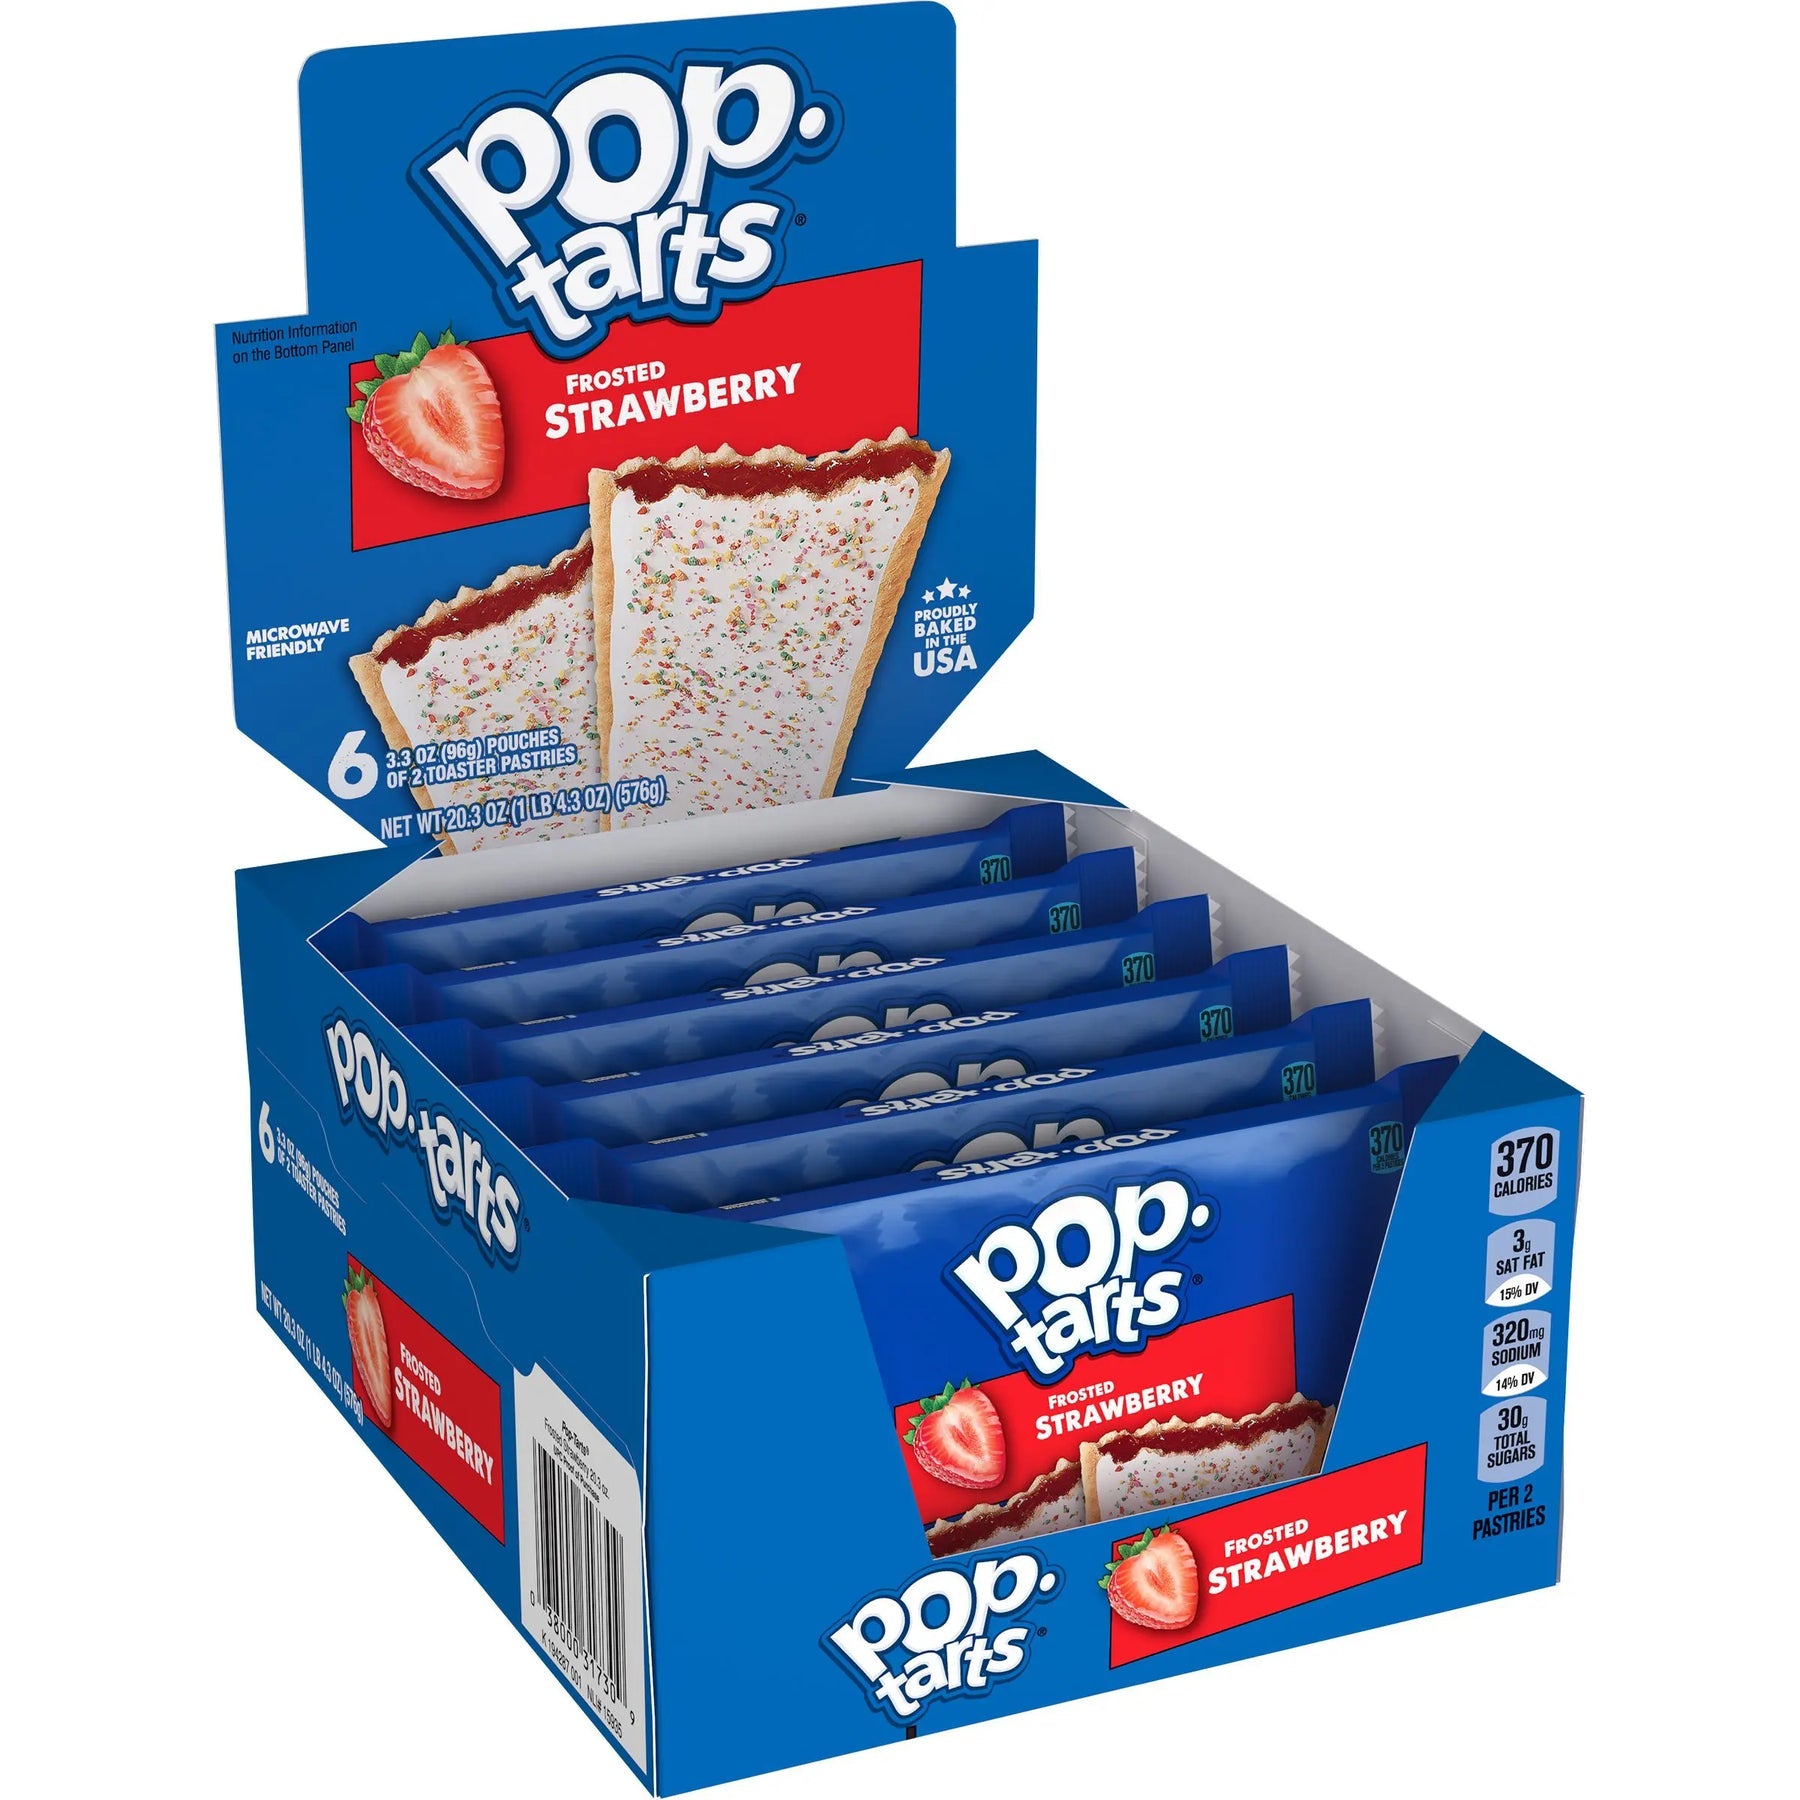 Kellogg's Frosted Strawberry Pop-Tarts - 96g (6 pack) - Z19